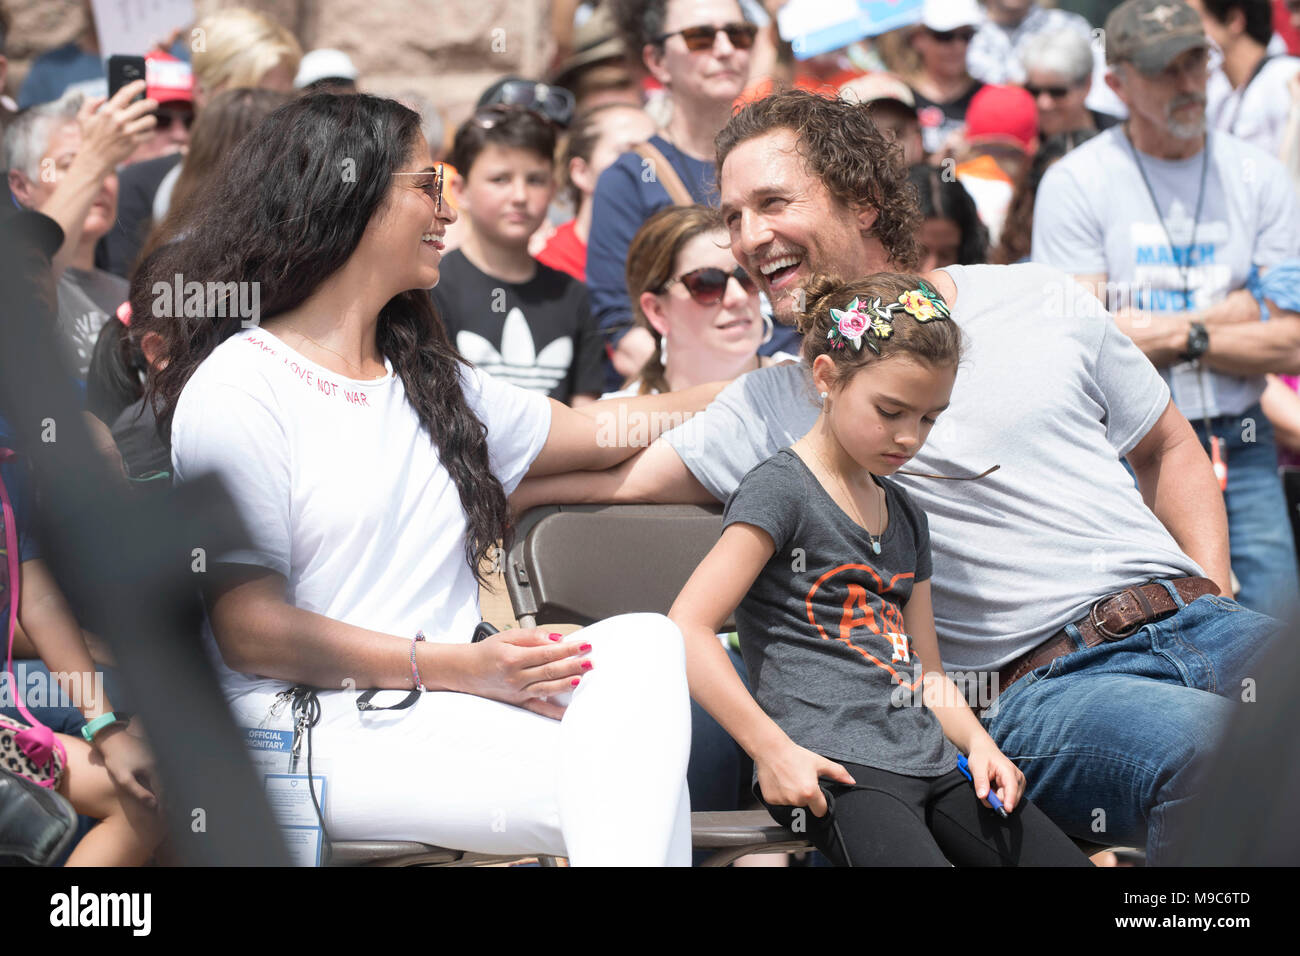 Actor Matthew McConaughey, with wife Camila Alves and daughter Vida, waits to speak to the nearly 10,000 marchers who converged at the Texas State Capitol at March For Our Lives protesting gun violence in the wake of school mass shootings including Parkland, FL in February 2018. Stock Photo